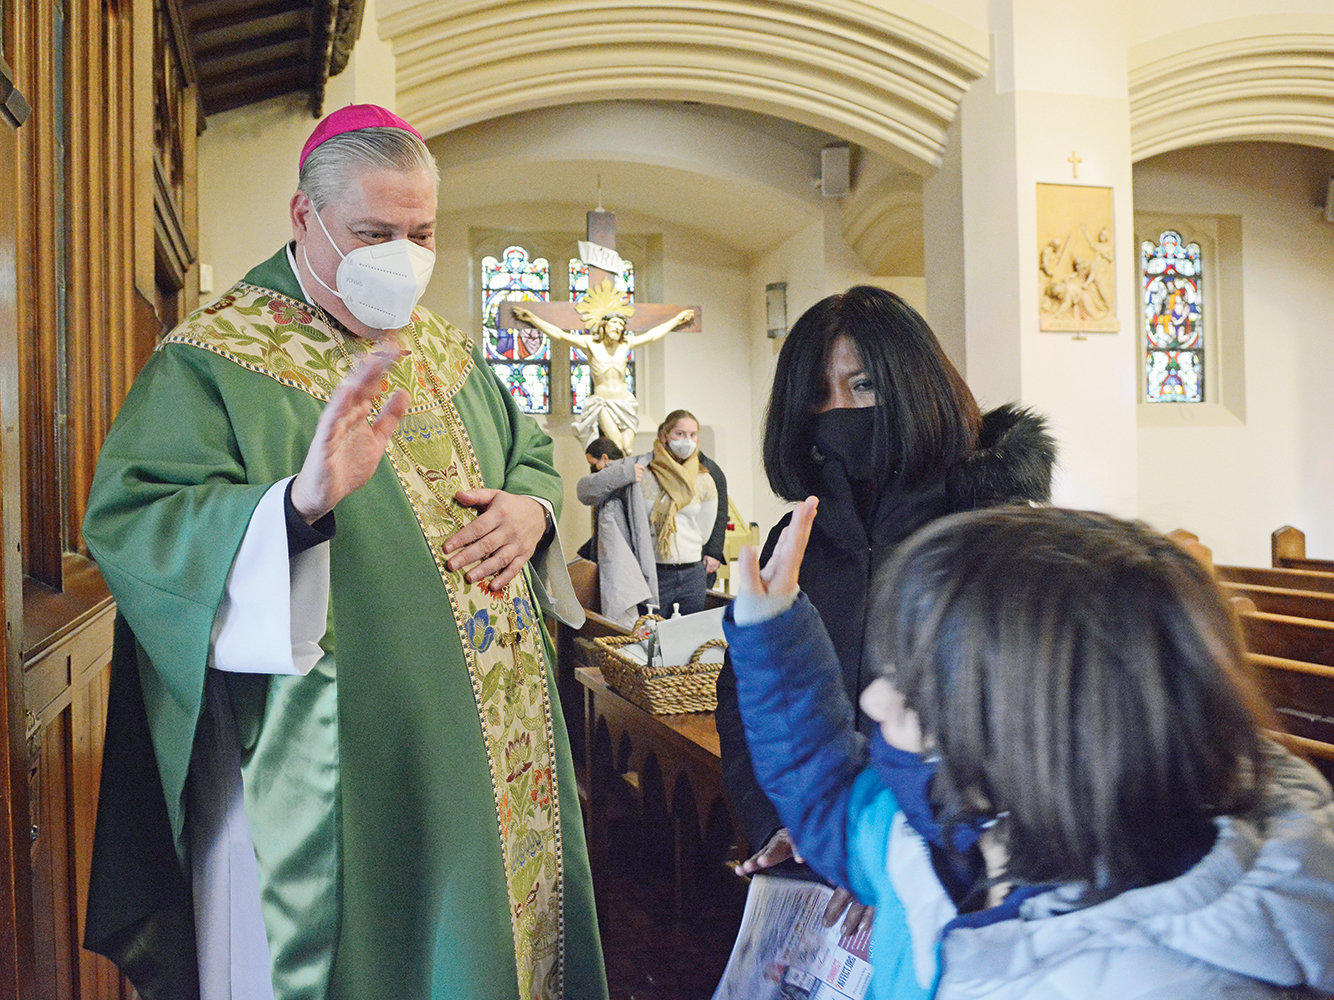 Bishop-elect John Bonnici greets a young parishioner at St. Augustine’s Church in Larchmont Feb. 6.